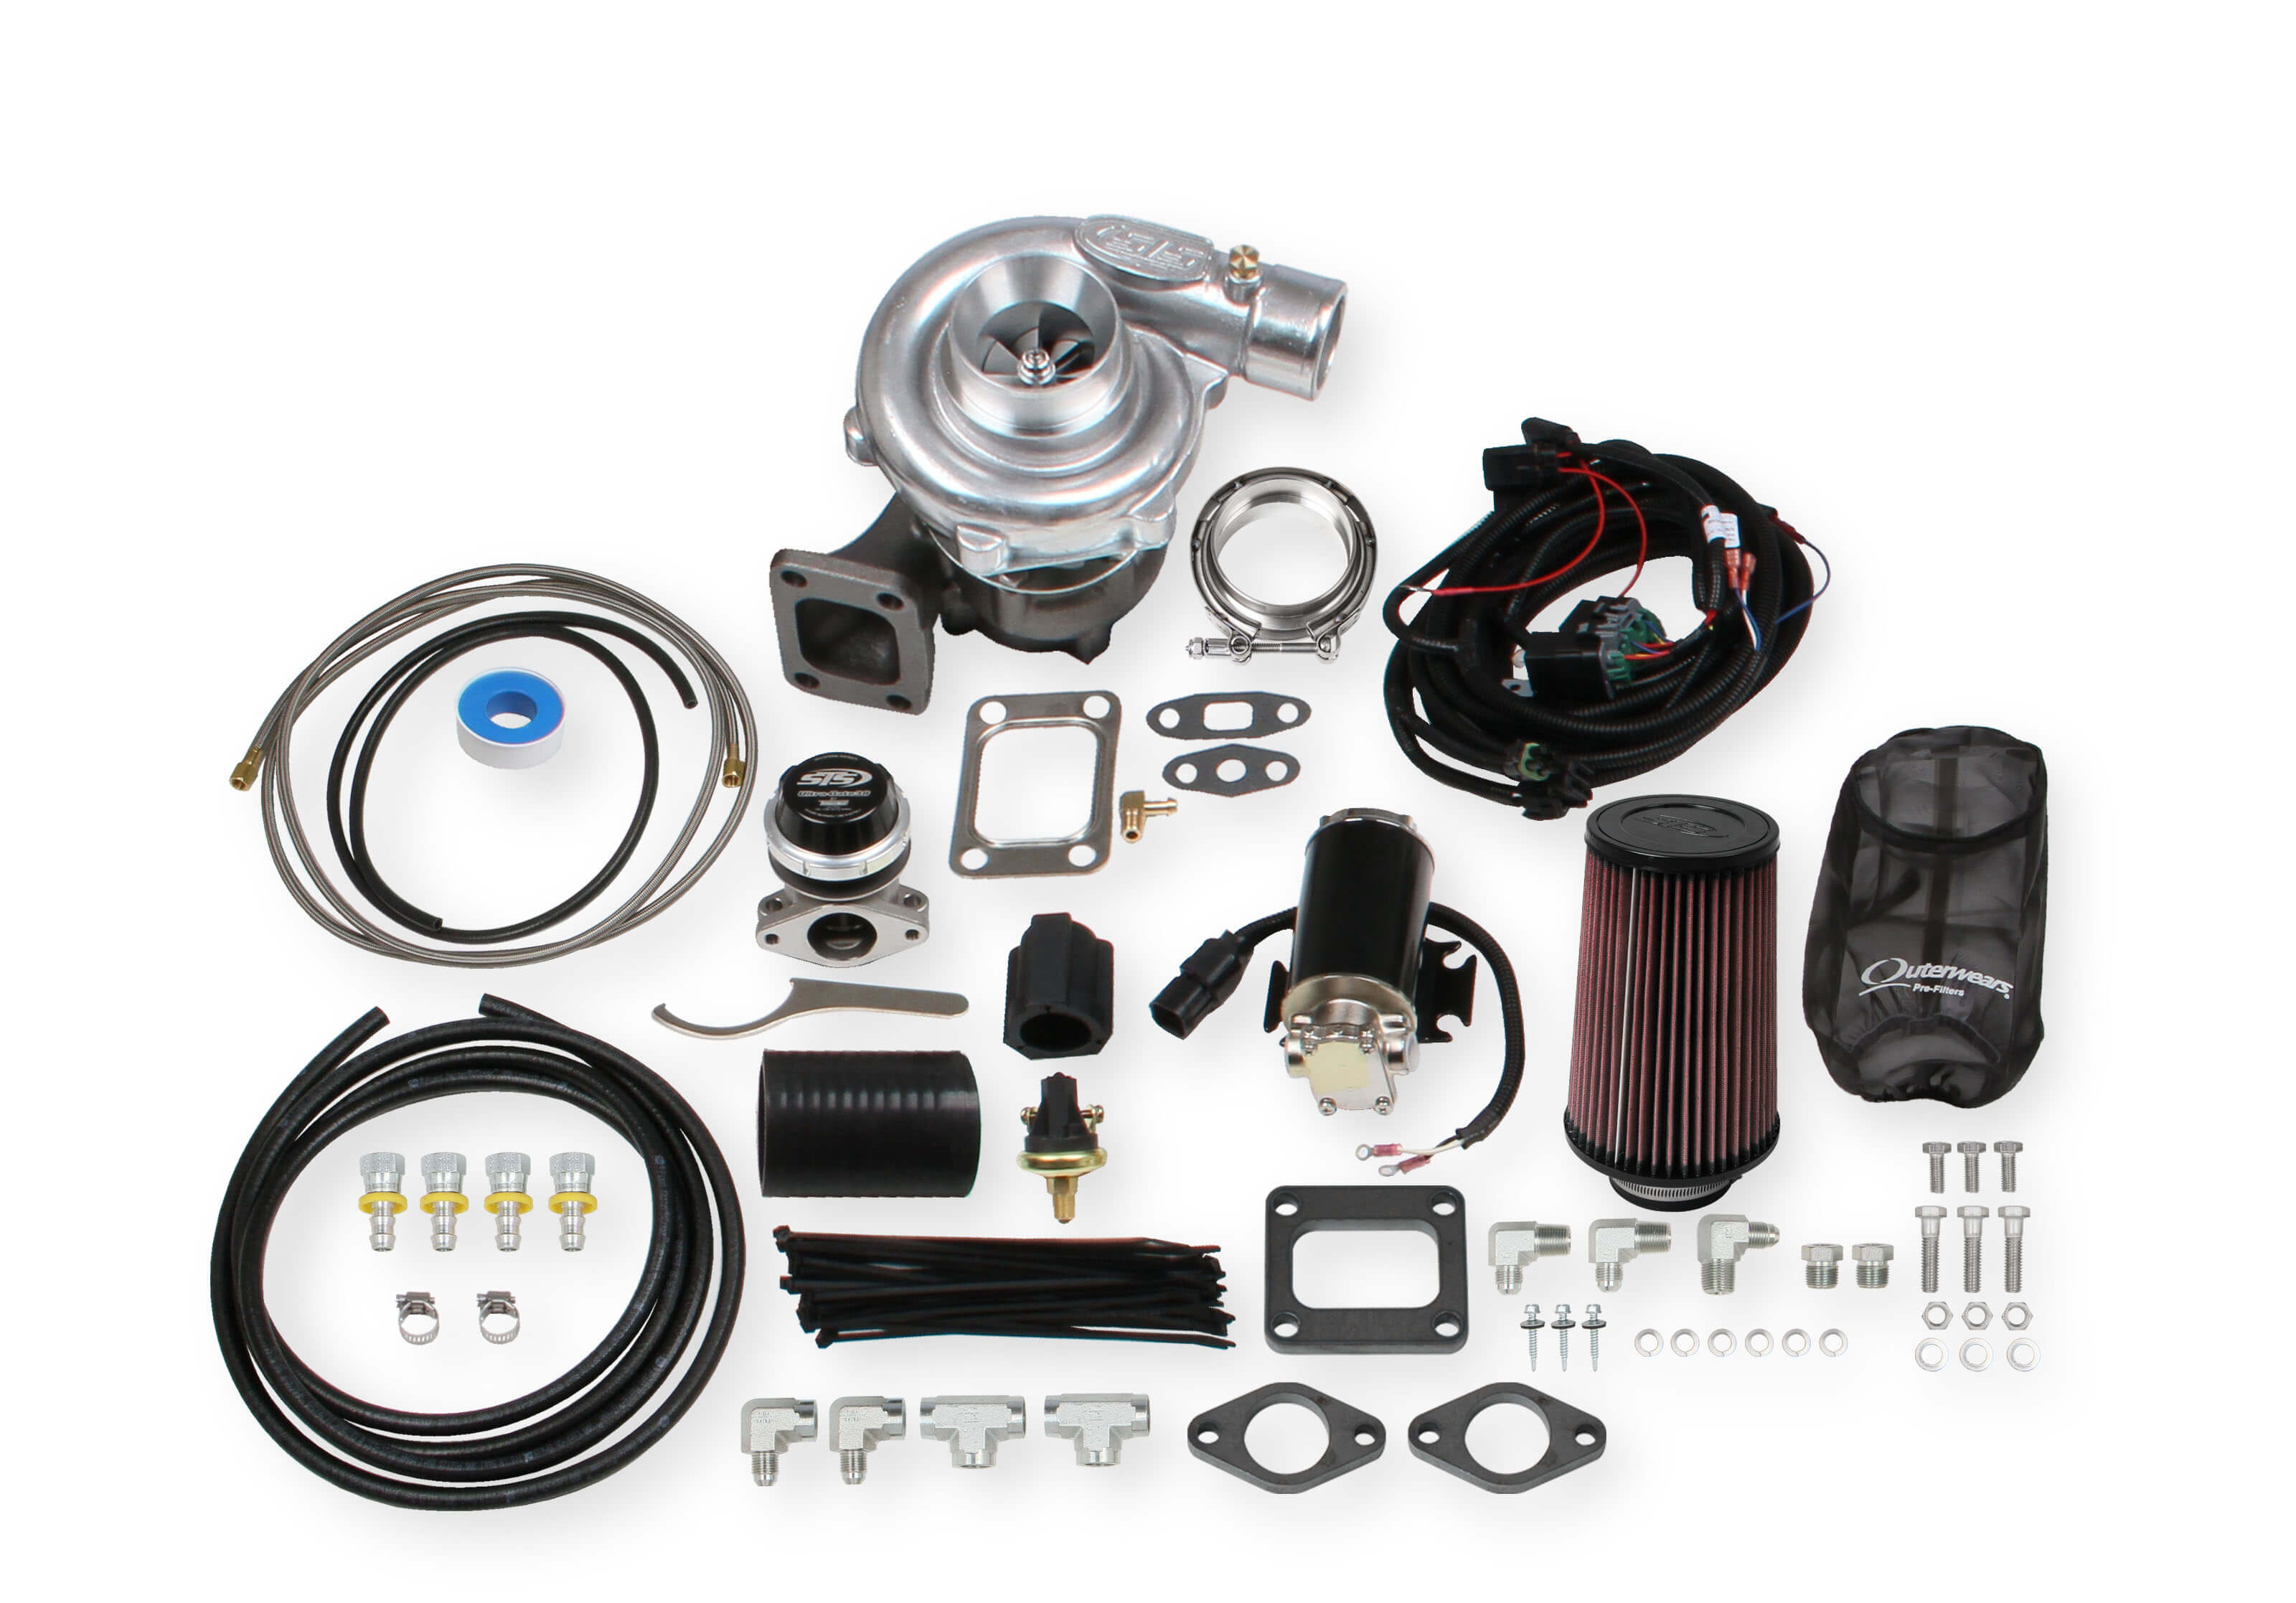 STS Turbo Remote Mounted Single Turbo Kit for 6.0-7.0 liter engines